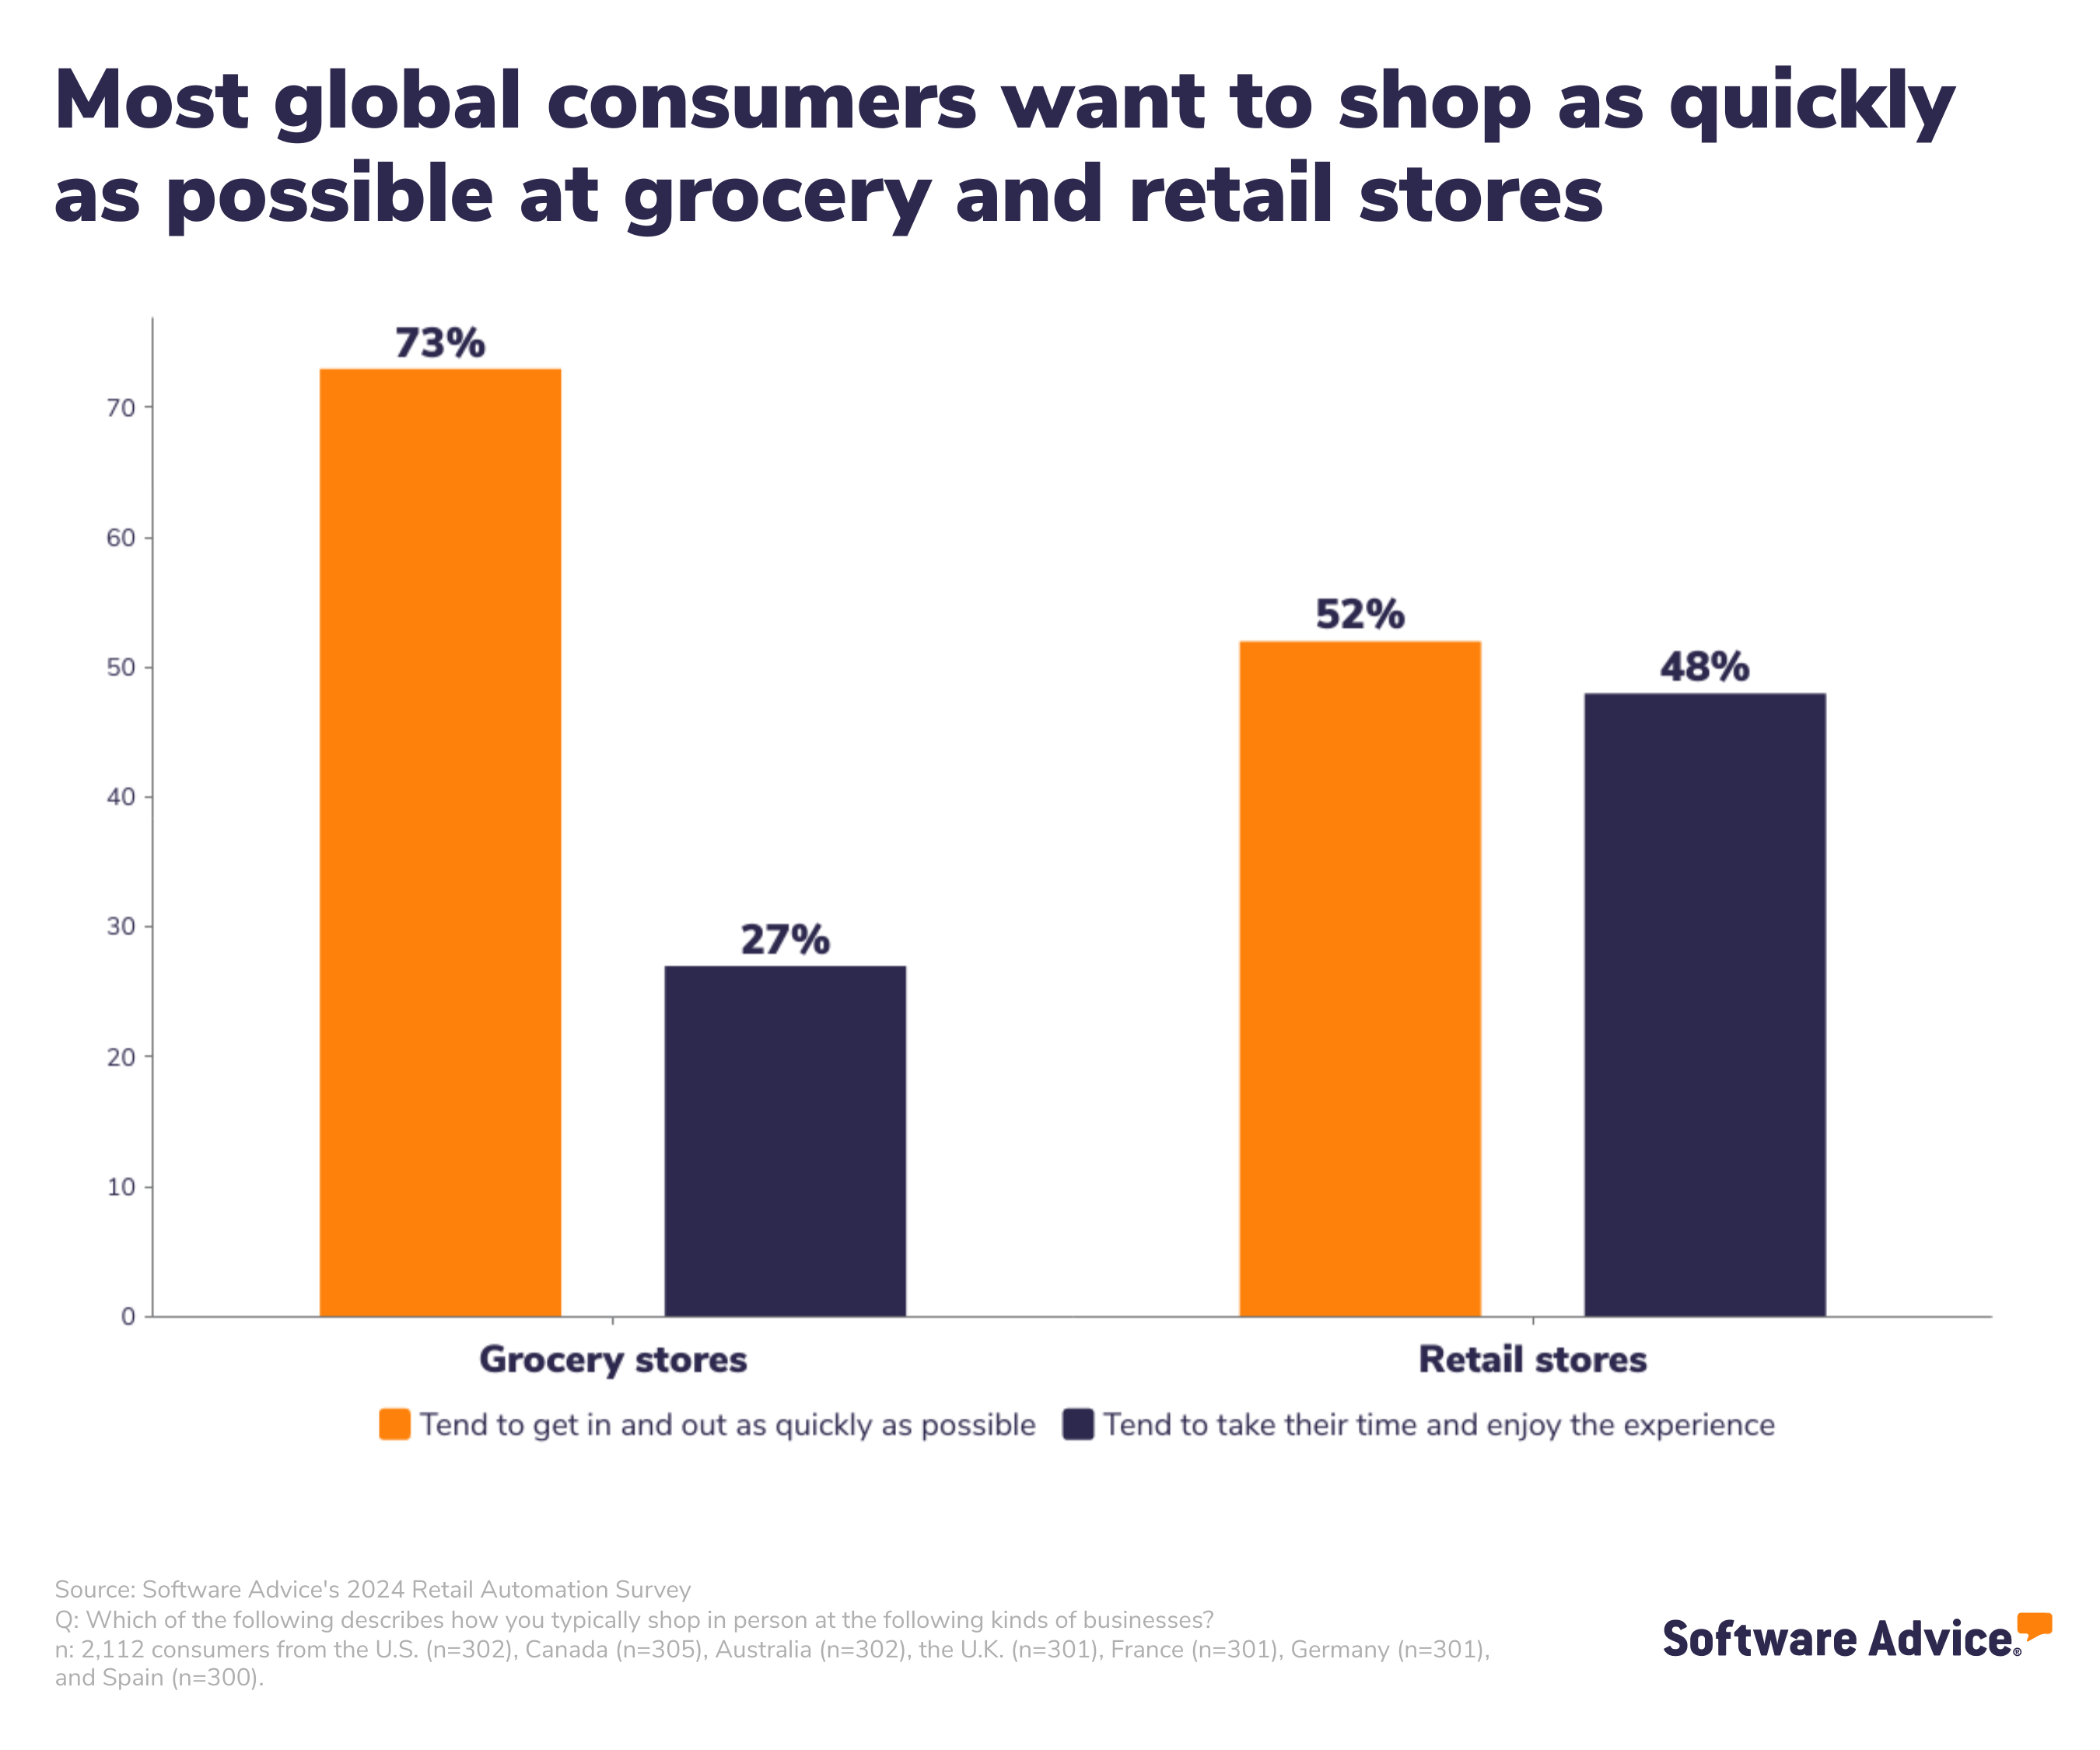 Bar chart showing that consumers generally want to get in and out of retail and grocery stores as quickly as possible. 